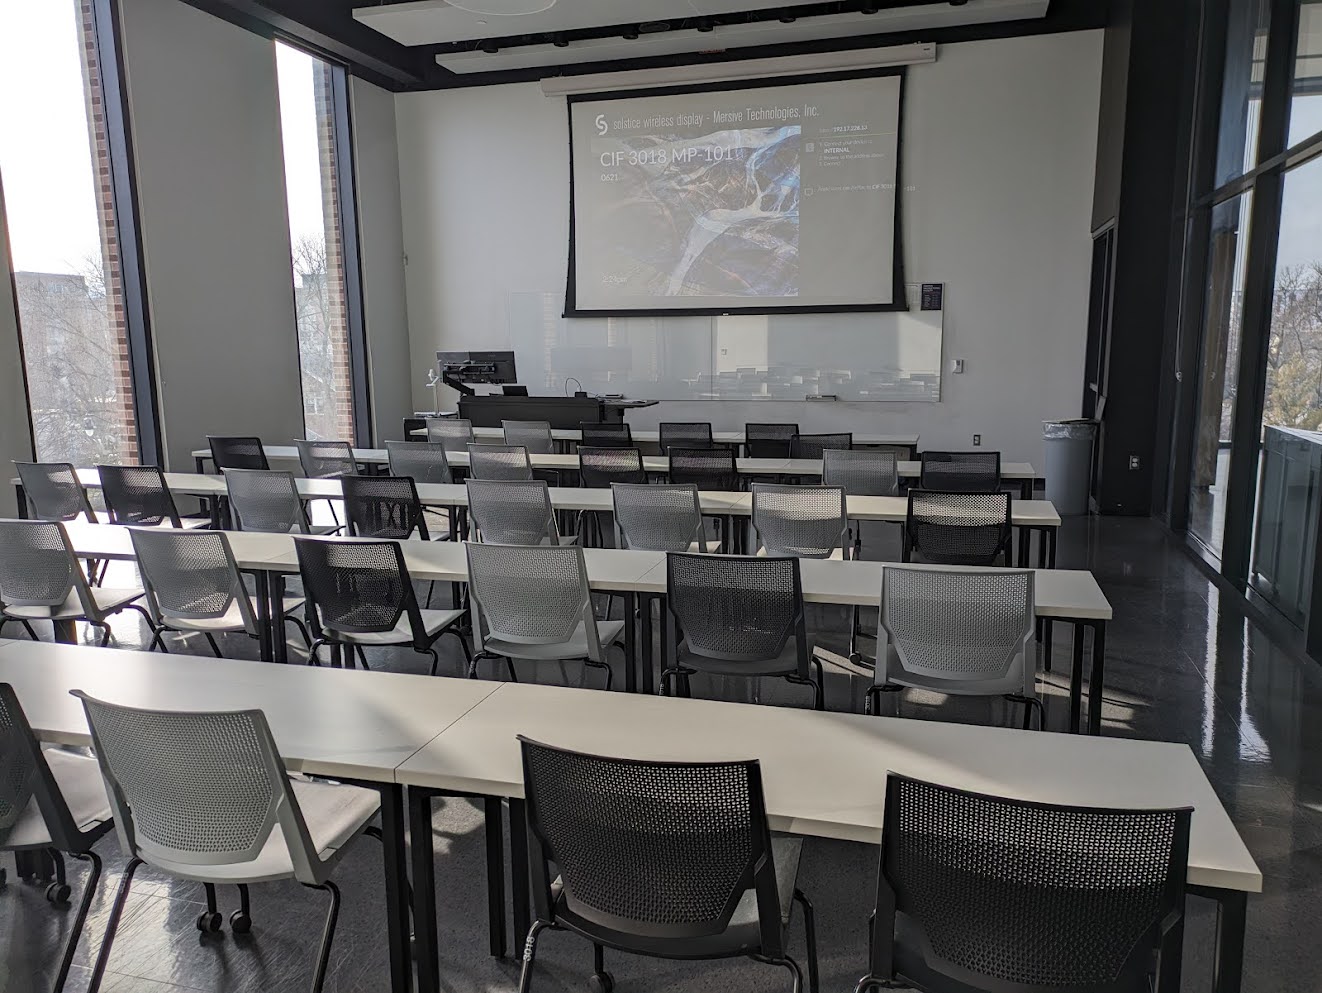 This is a view of the room, with student desks, a front lectern, projection screen, and a glass board.